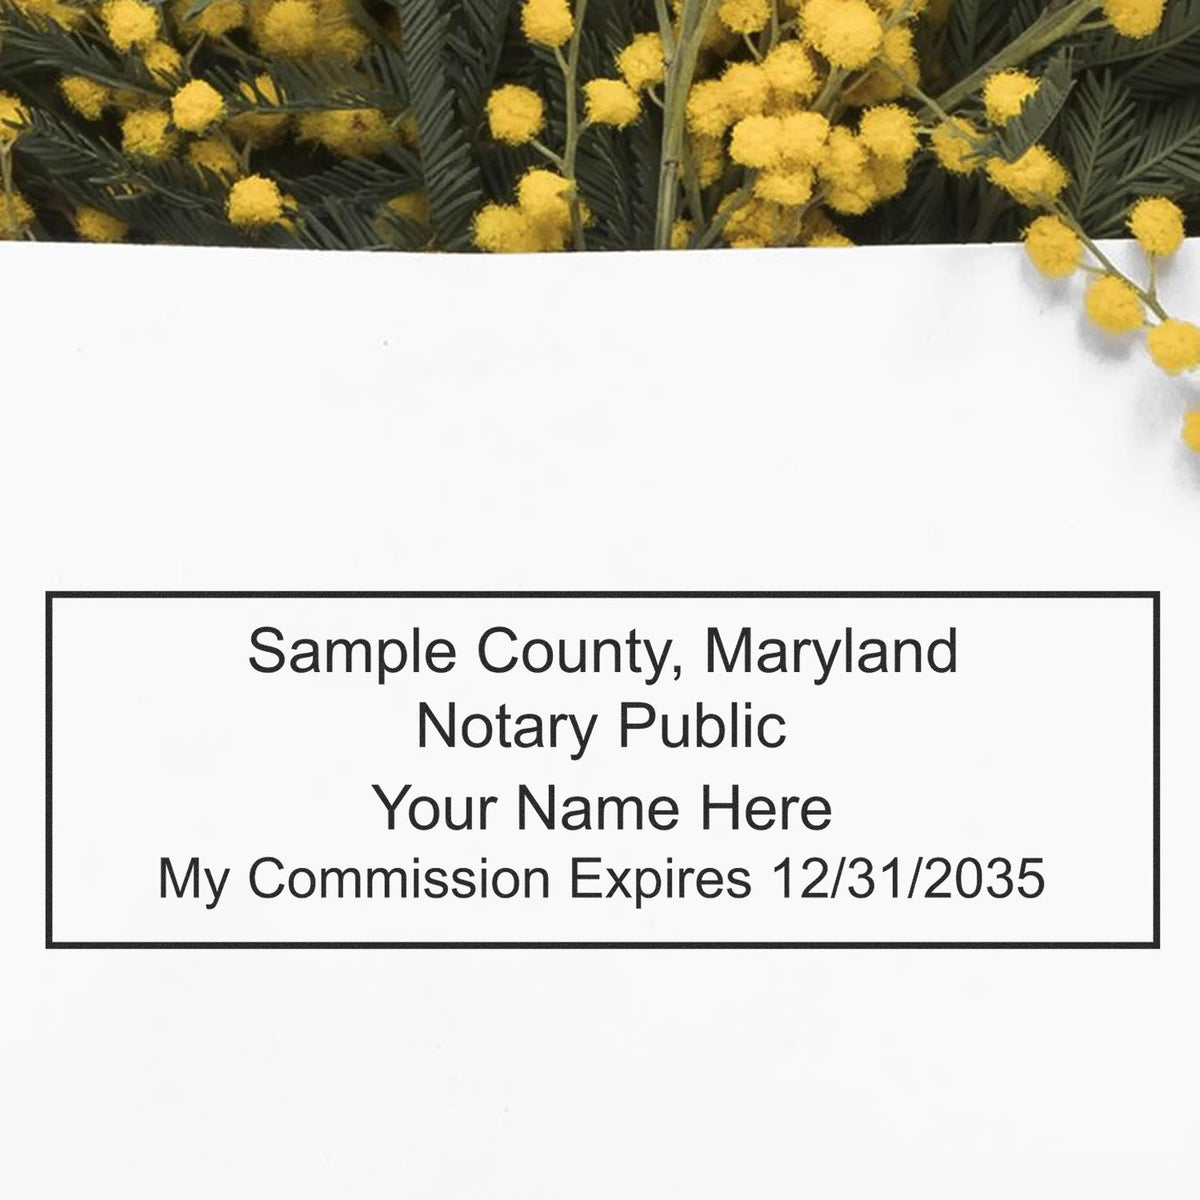 An alternative view of the PSI Maryland Notary Stamp stamped on a sheet of paper showing the image in use